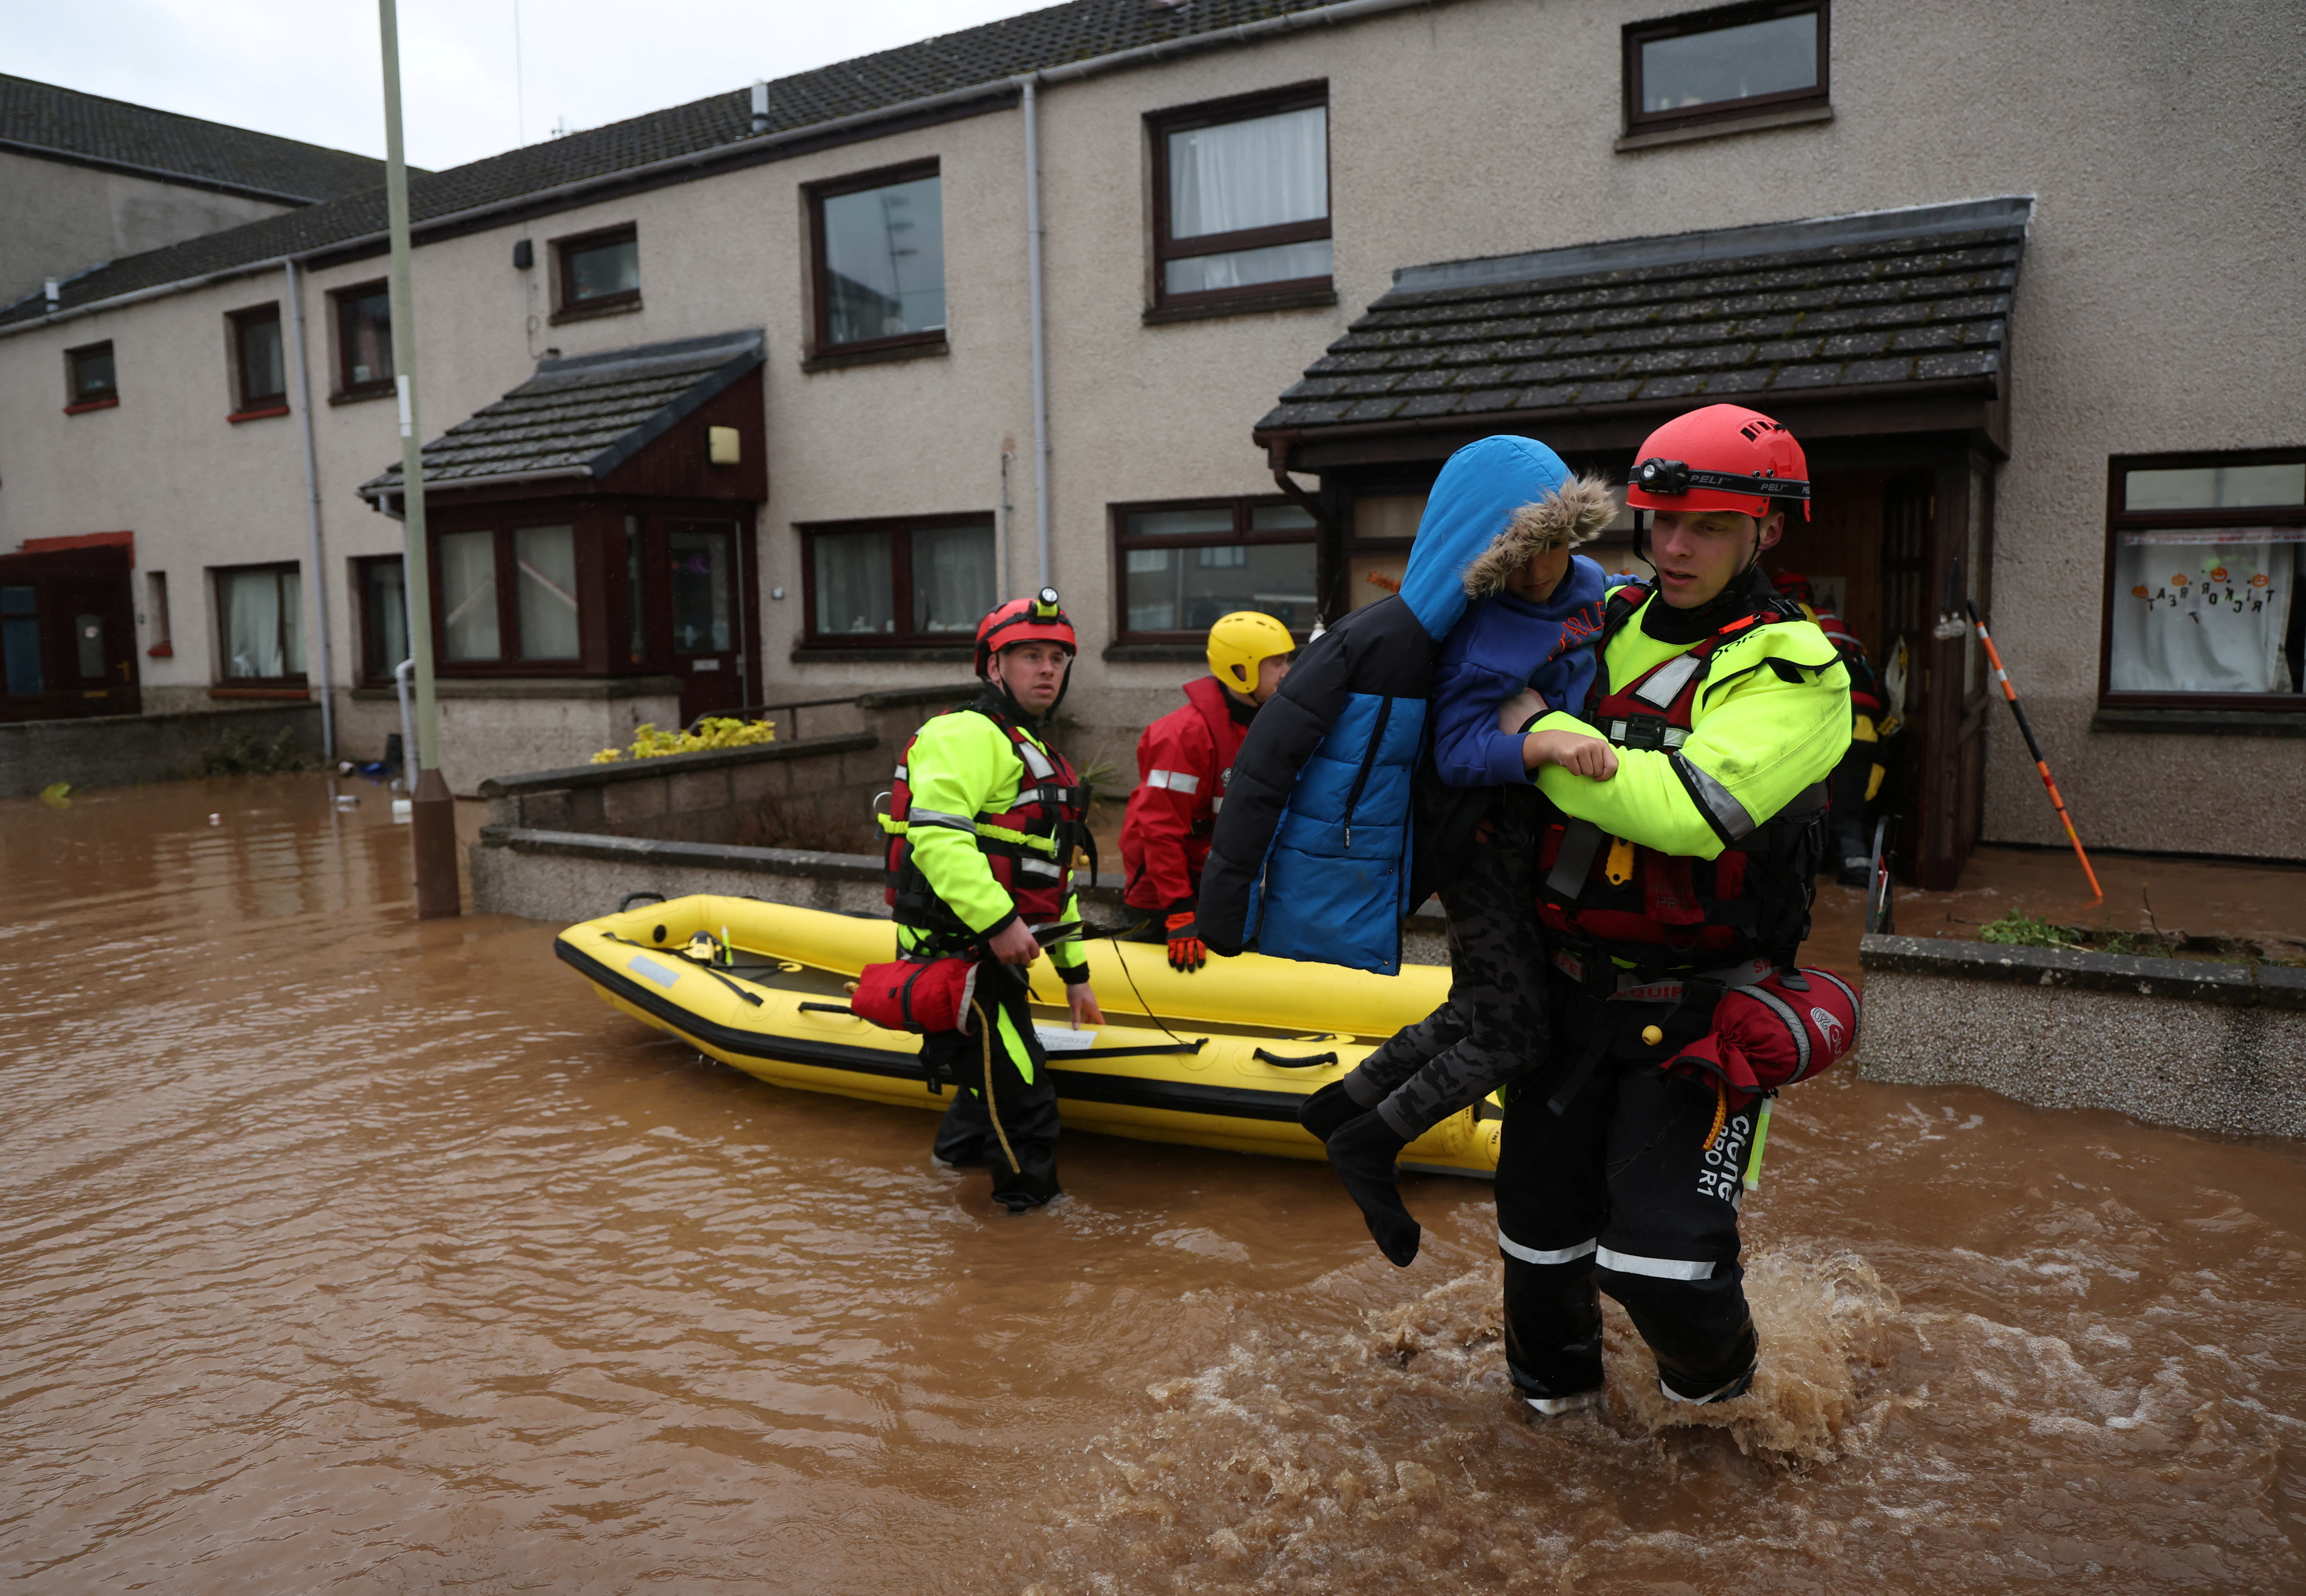 Emergency services assist in the evacuation of a family from their home in Brechin